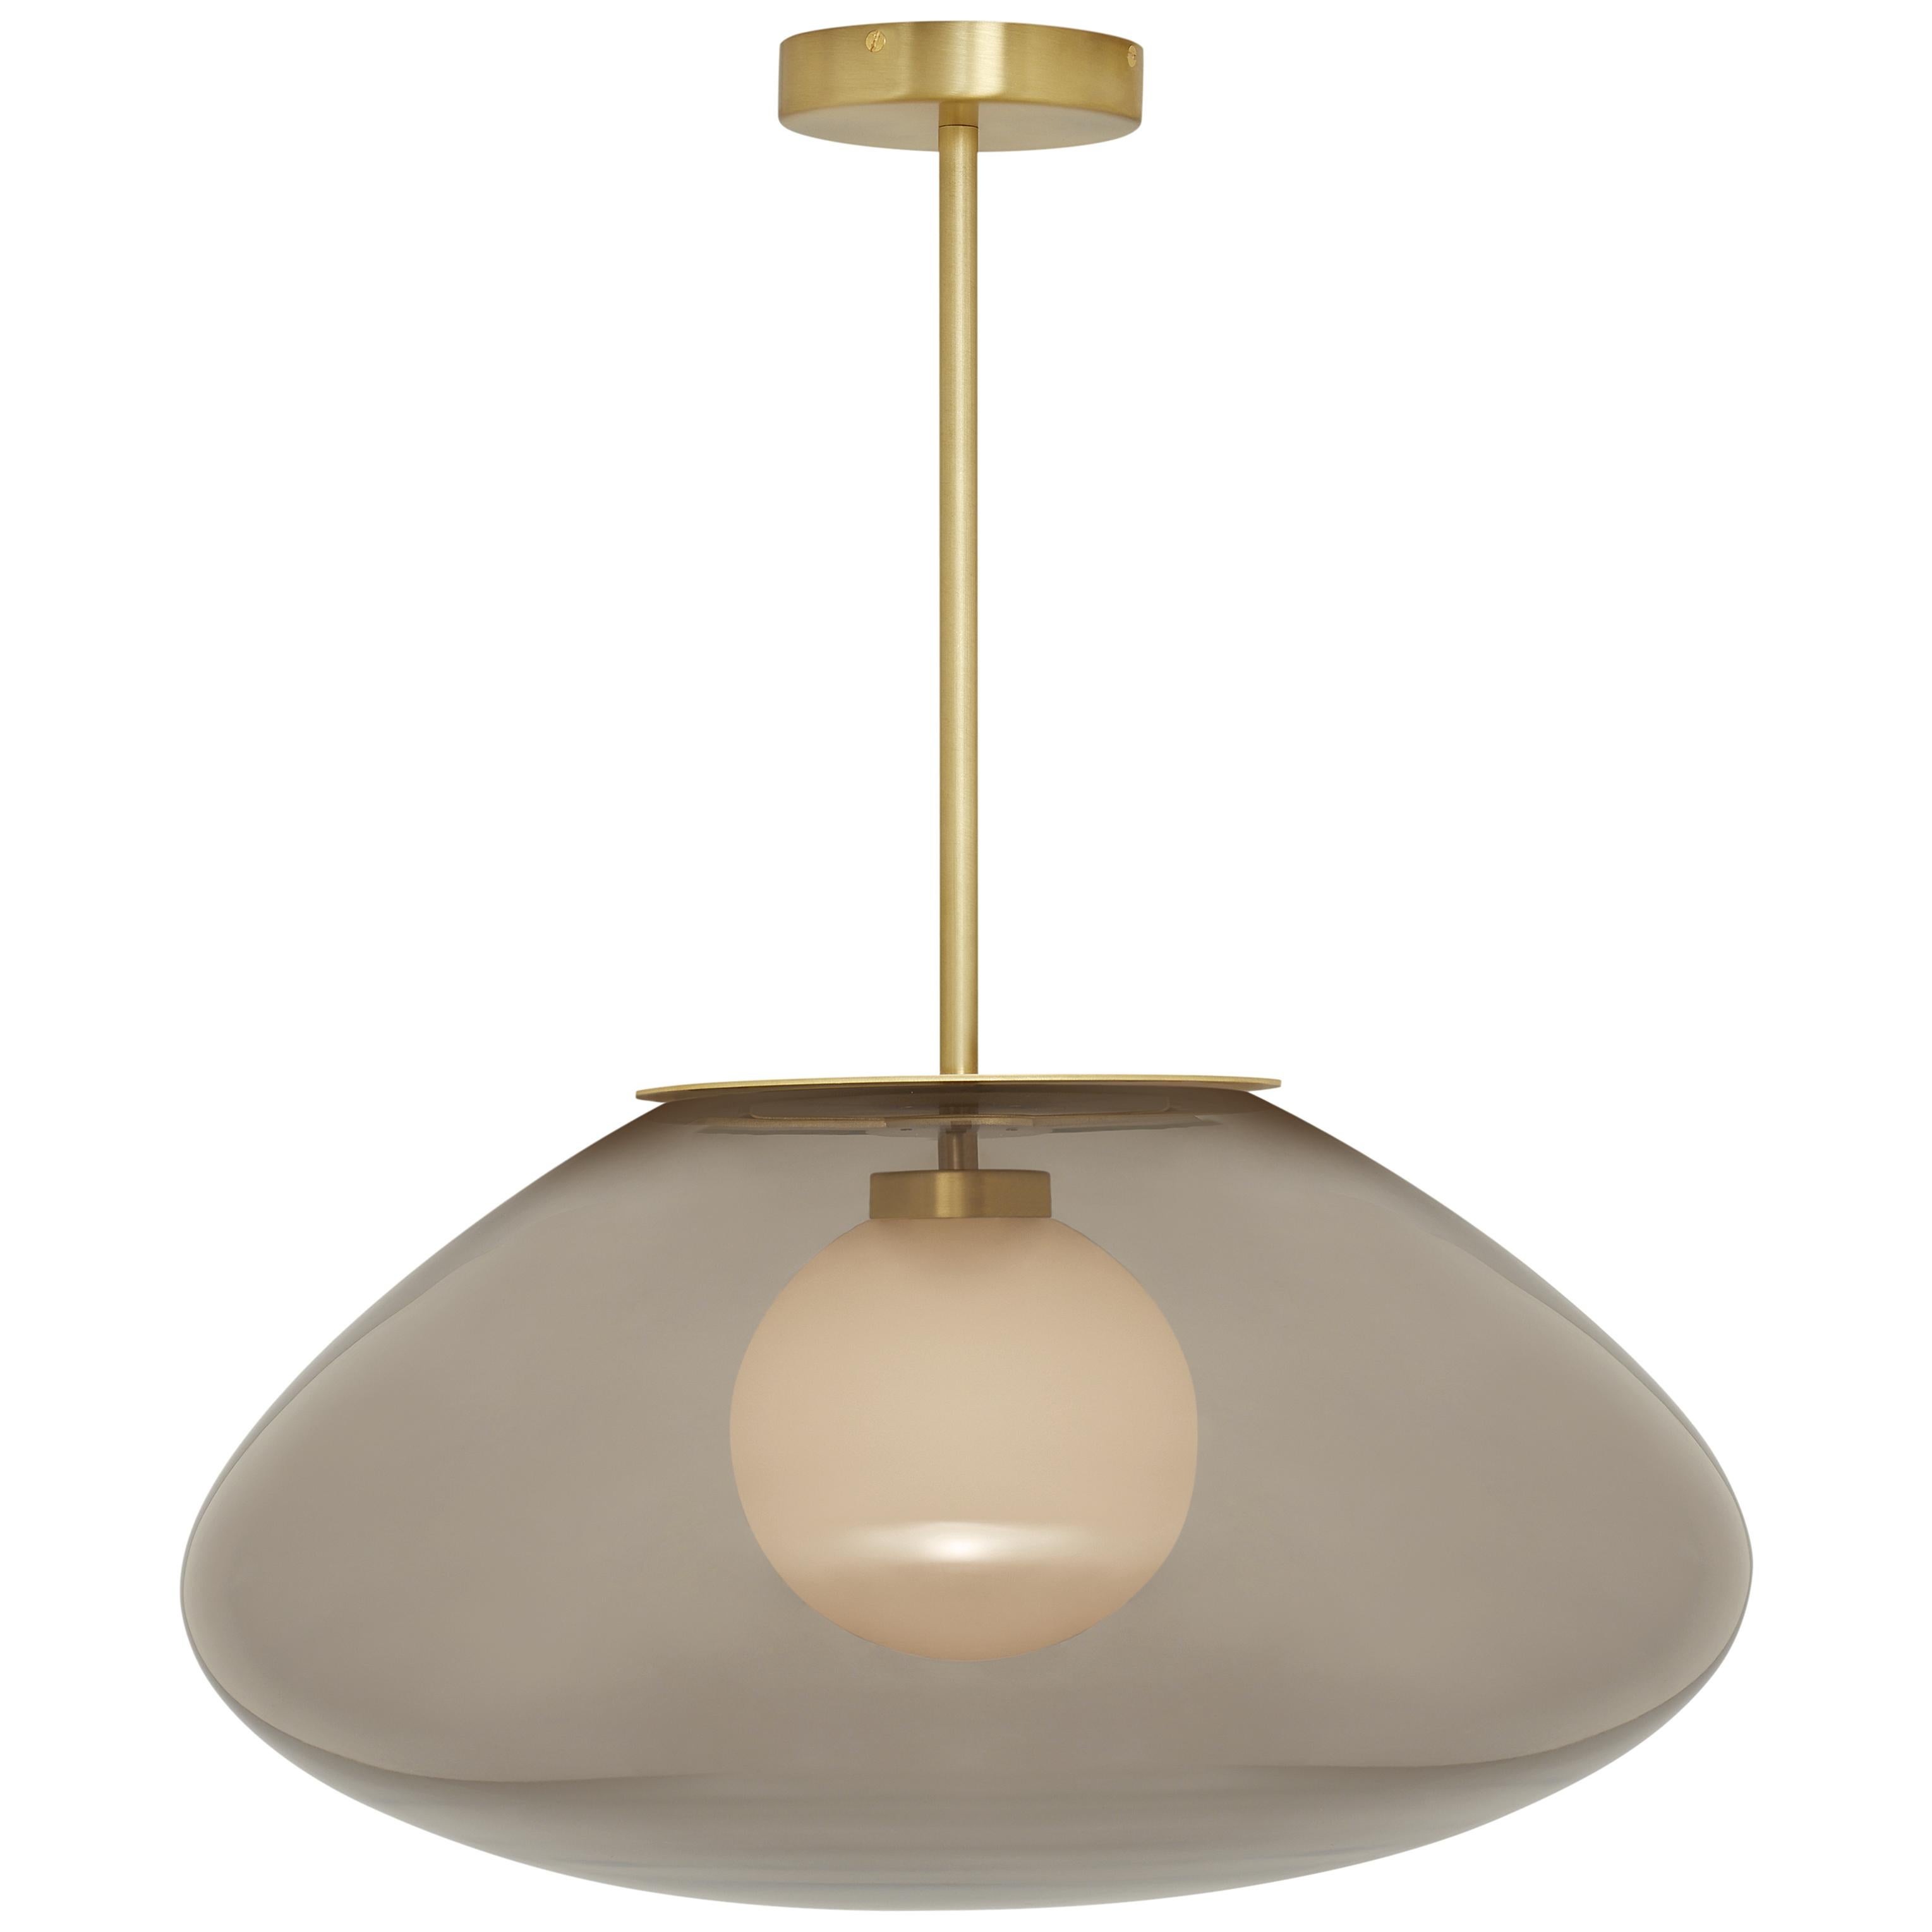 Petra large pendant by CTO lighting
Materials: satin brass with smoked glass shade and hand shaped smoked glass inner shade
Also available in dark bronze with smoked glass shade and hand shaped smoked glass inner shade,
satin brass with smoked glass